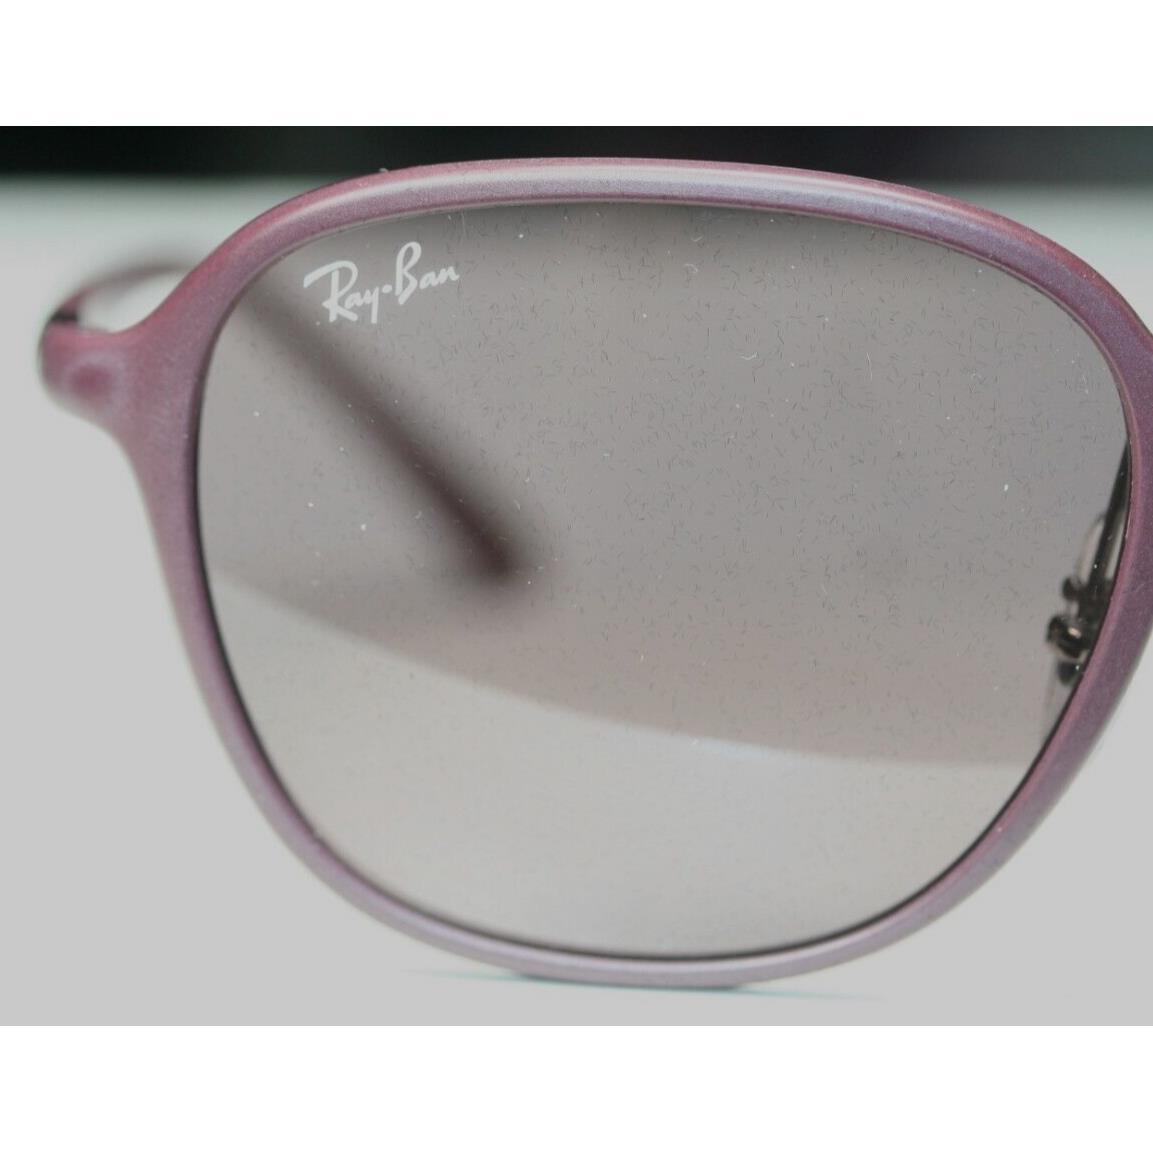 Ray-Ban sunglasses  - Frame: Purple / Red, Lens: Violet